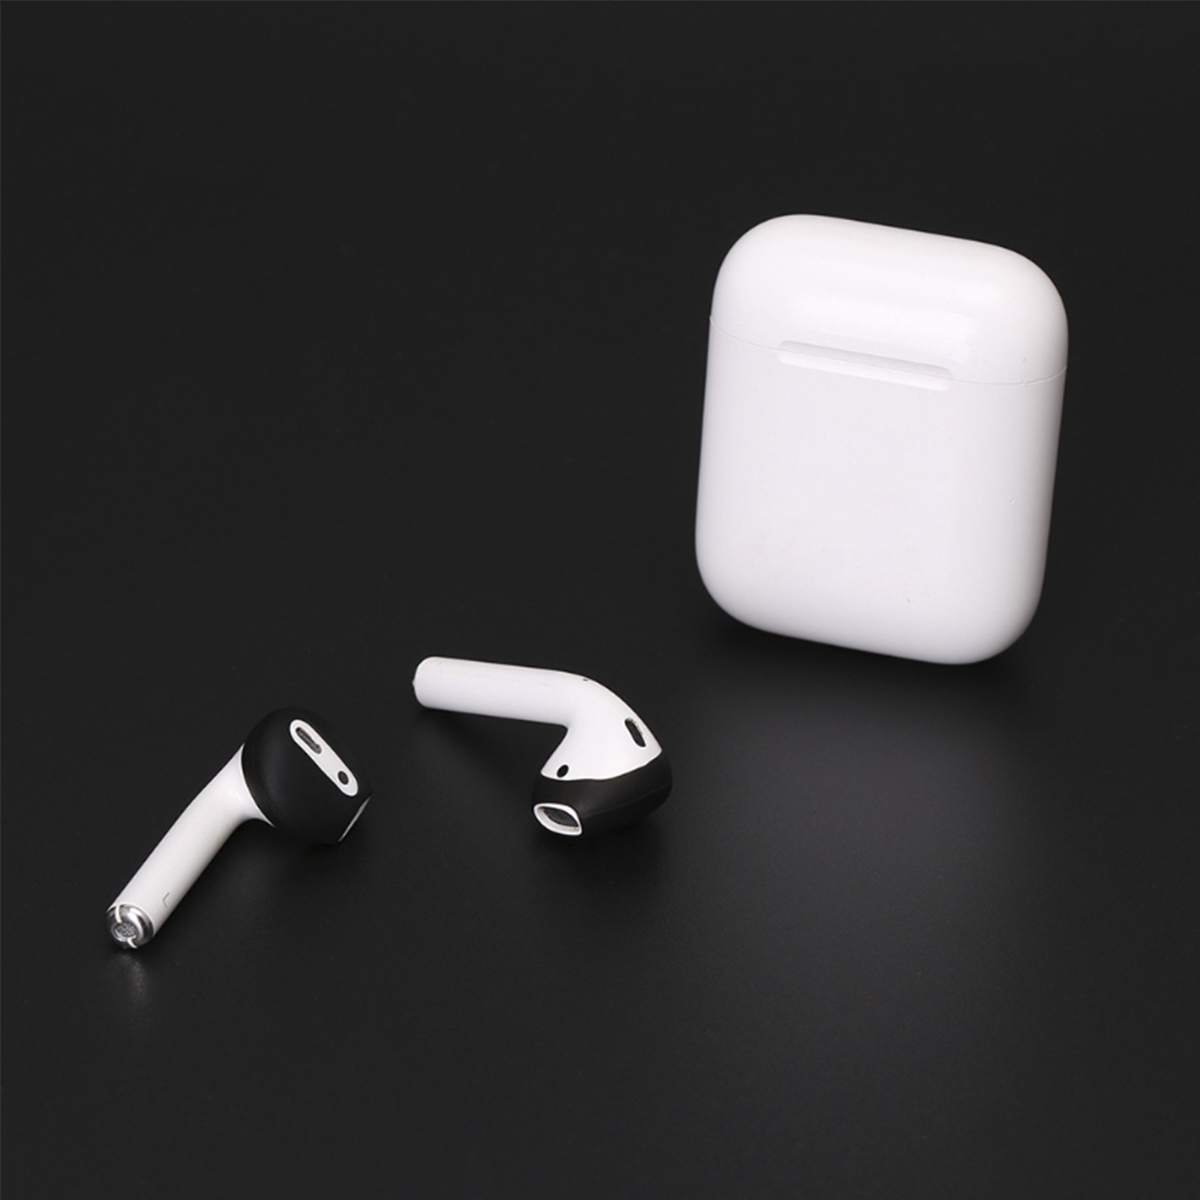 Ultra-thin-Protective-Sleeve-Silicone-Case-Earbud-Tip-for-Airpods-Headphones-1632040-8